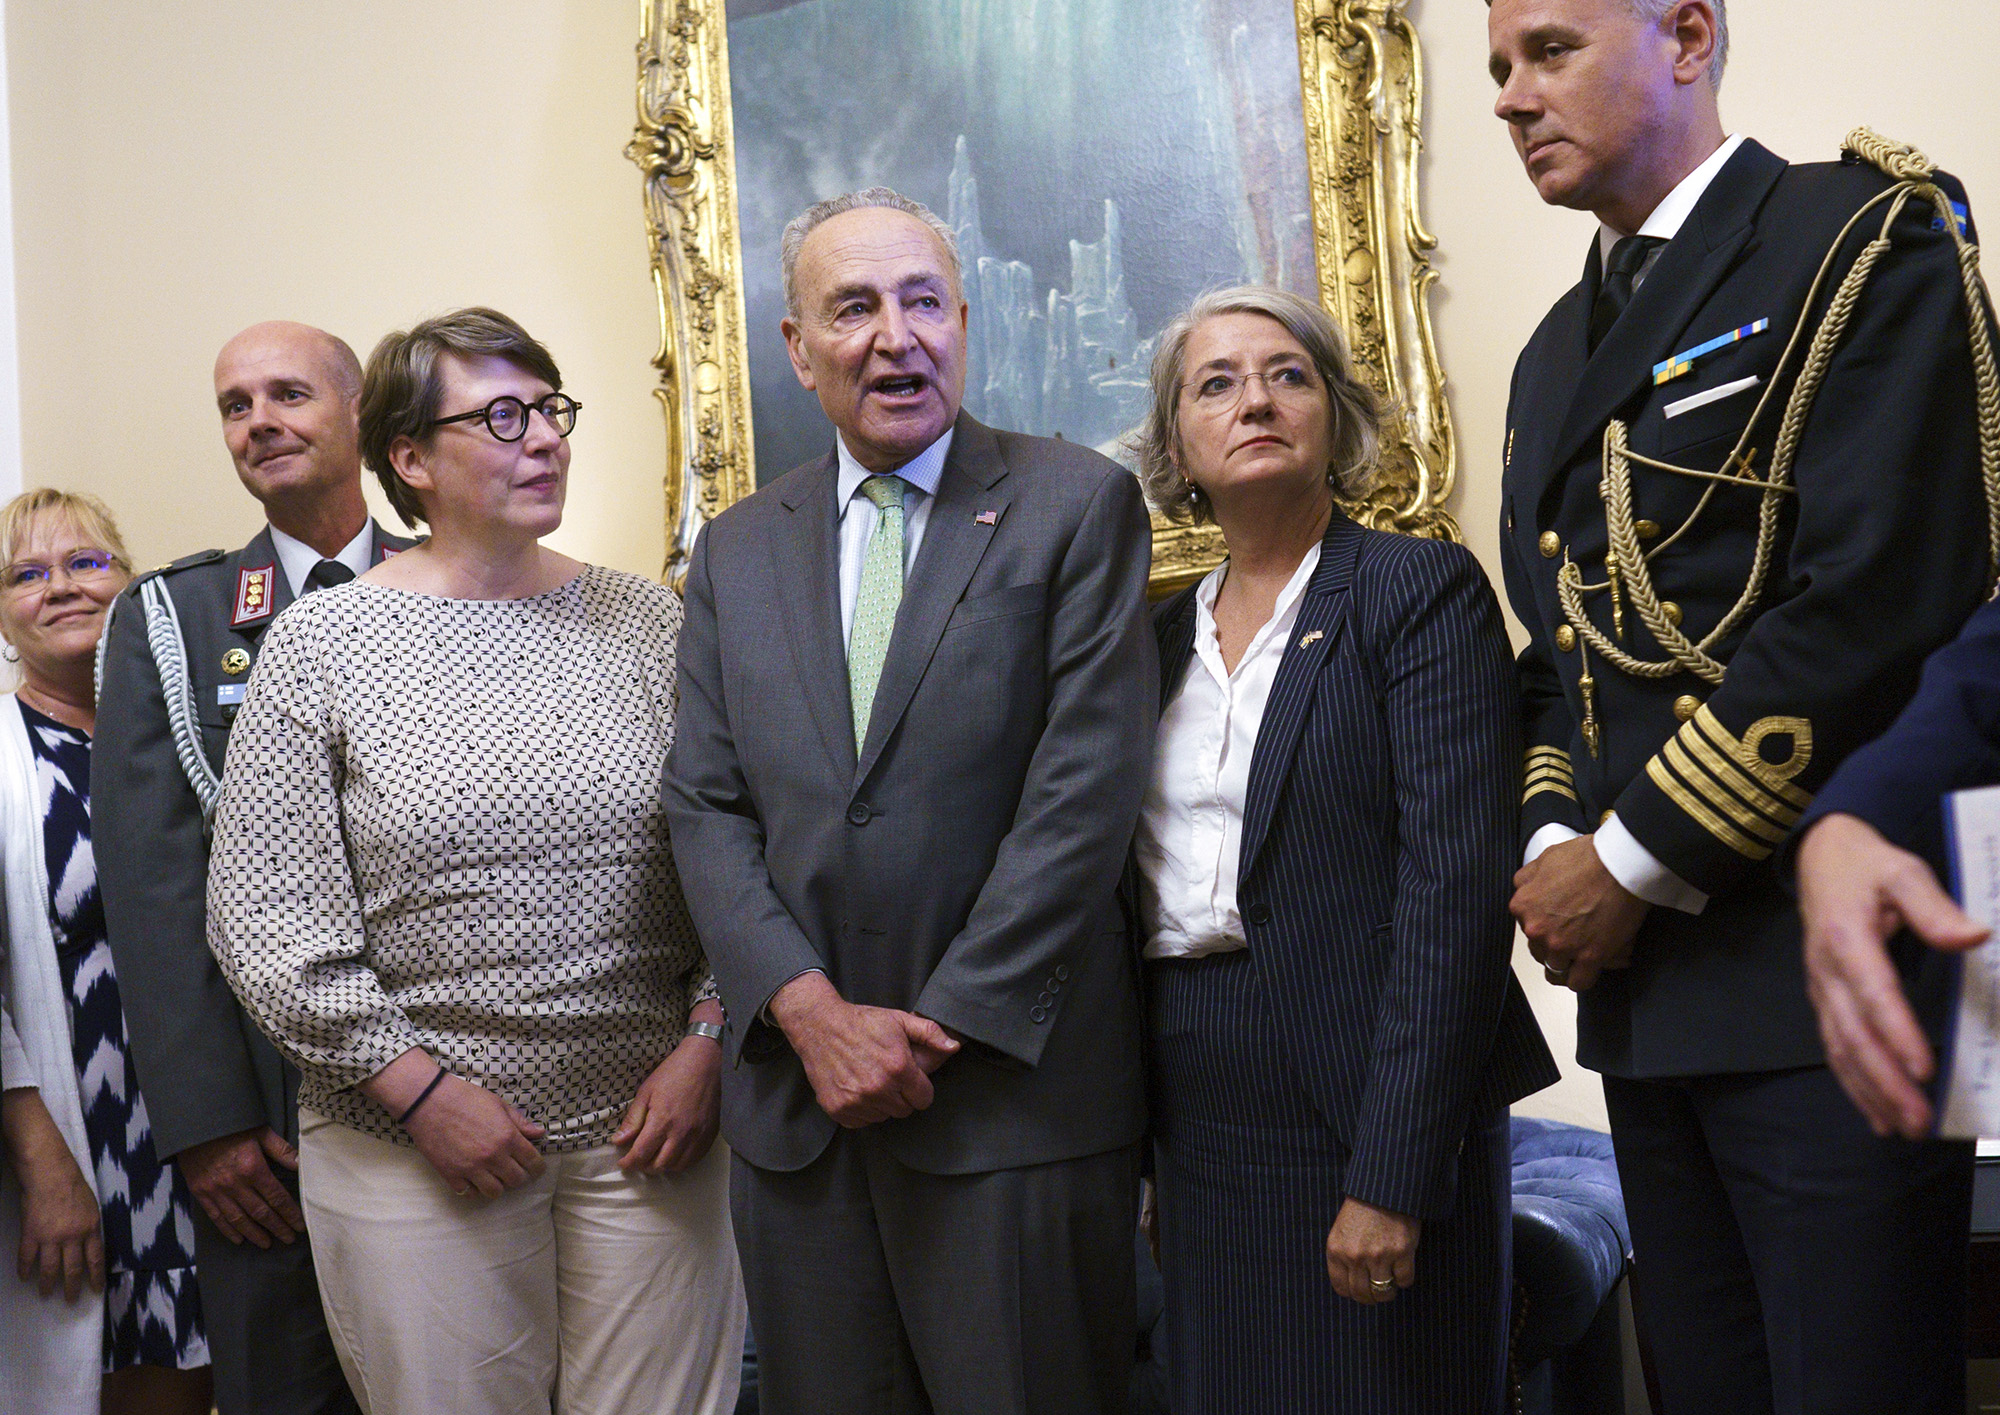 Senate Majority Leader Chuck Schumer, D-N.Y., flanked by Paivi Nevala, minister counselor of the Finnish Embassy, left, and Karin Olofsdotter, Sweden's ambassador to the US, before the Senate vote at the Capitol on Wednesday, Aug. 3.